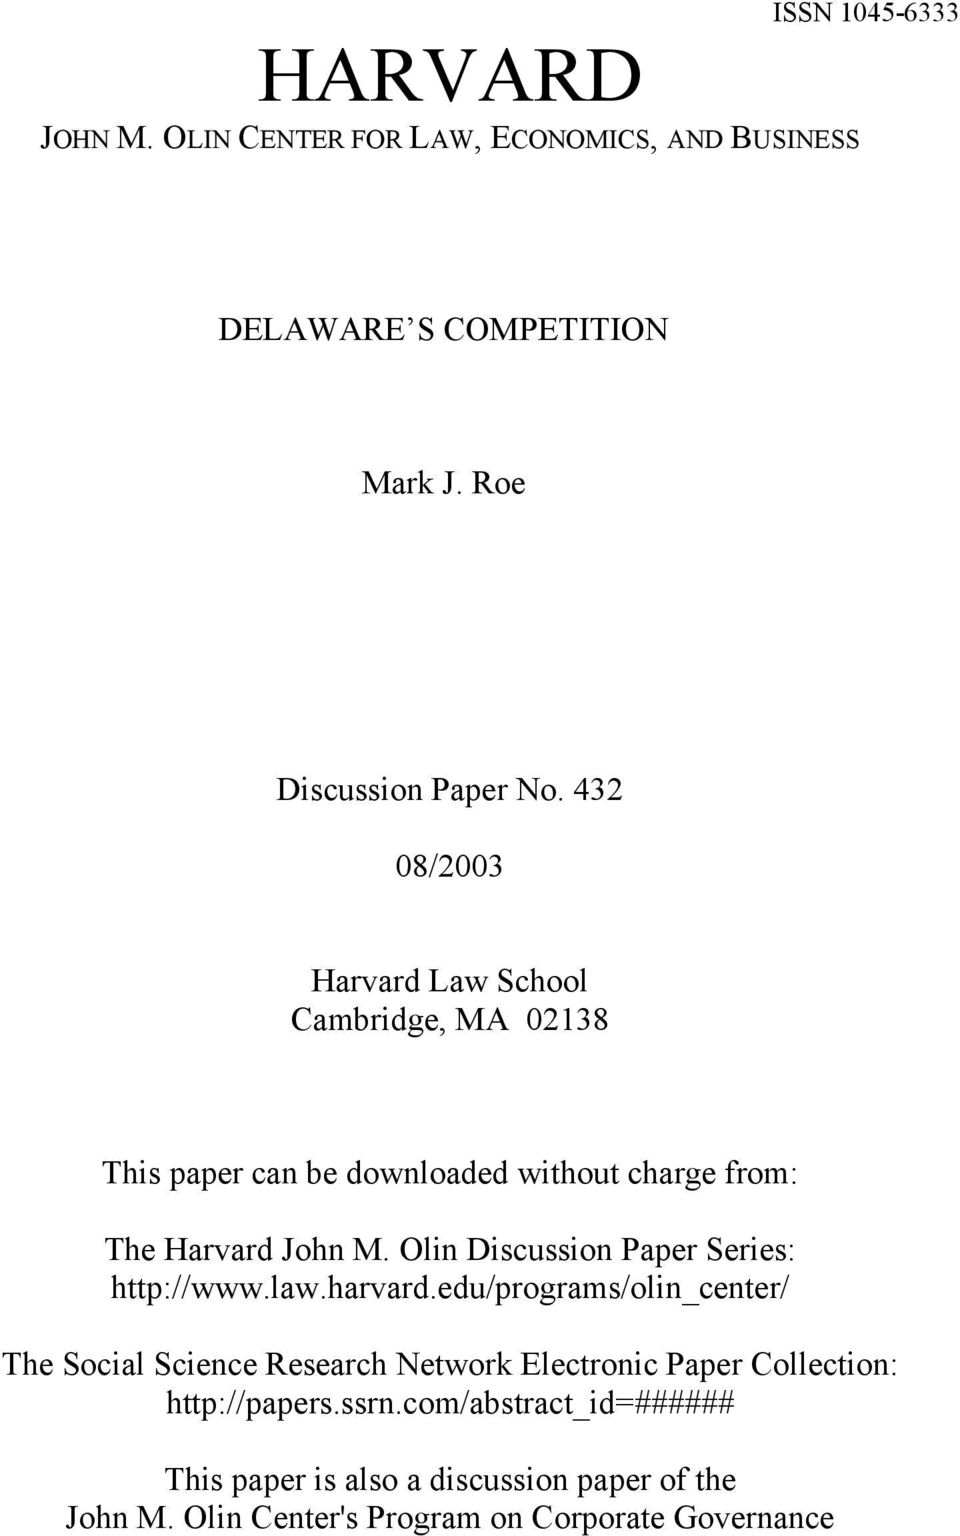 Olin Discussion Paper Series: http://www.law.harvard.